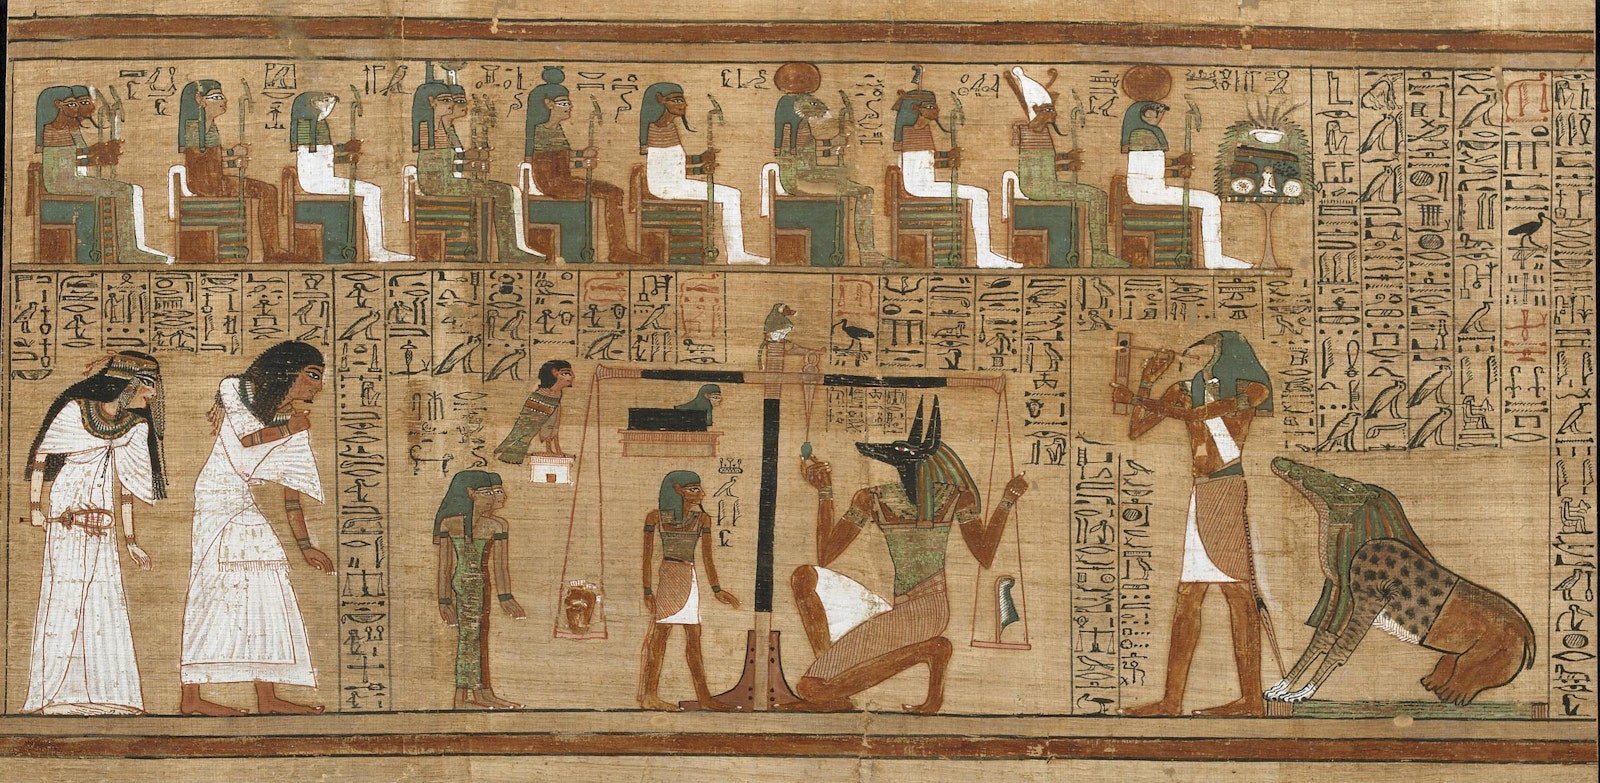 Book of the Dead of Ani (c. 1300 BCE)